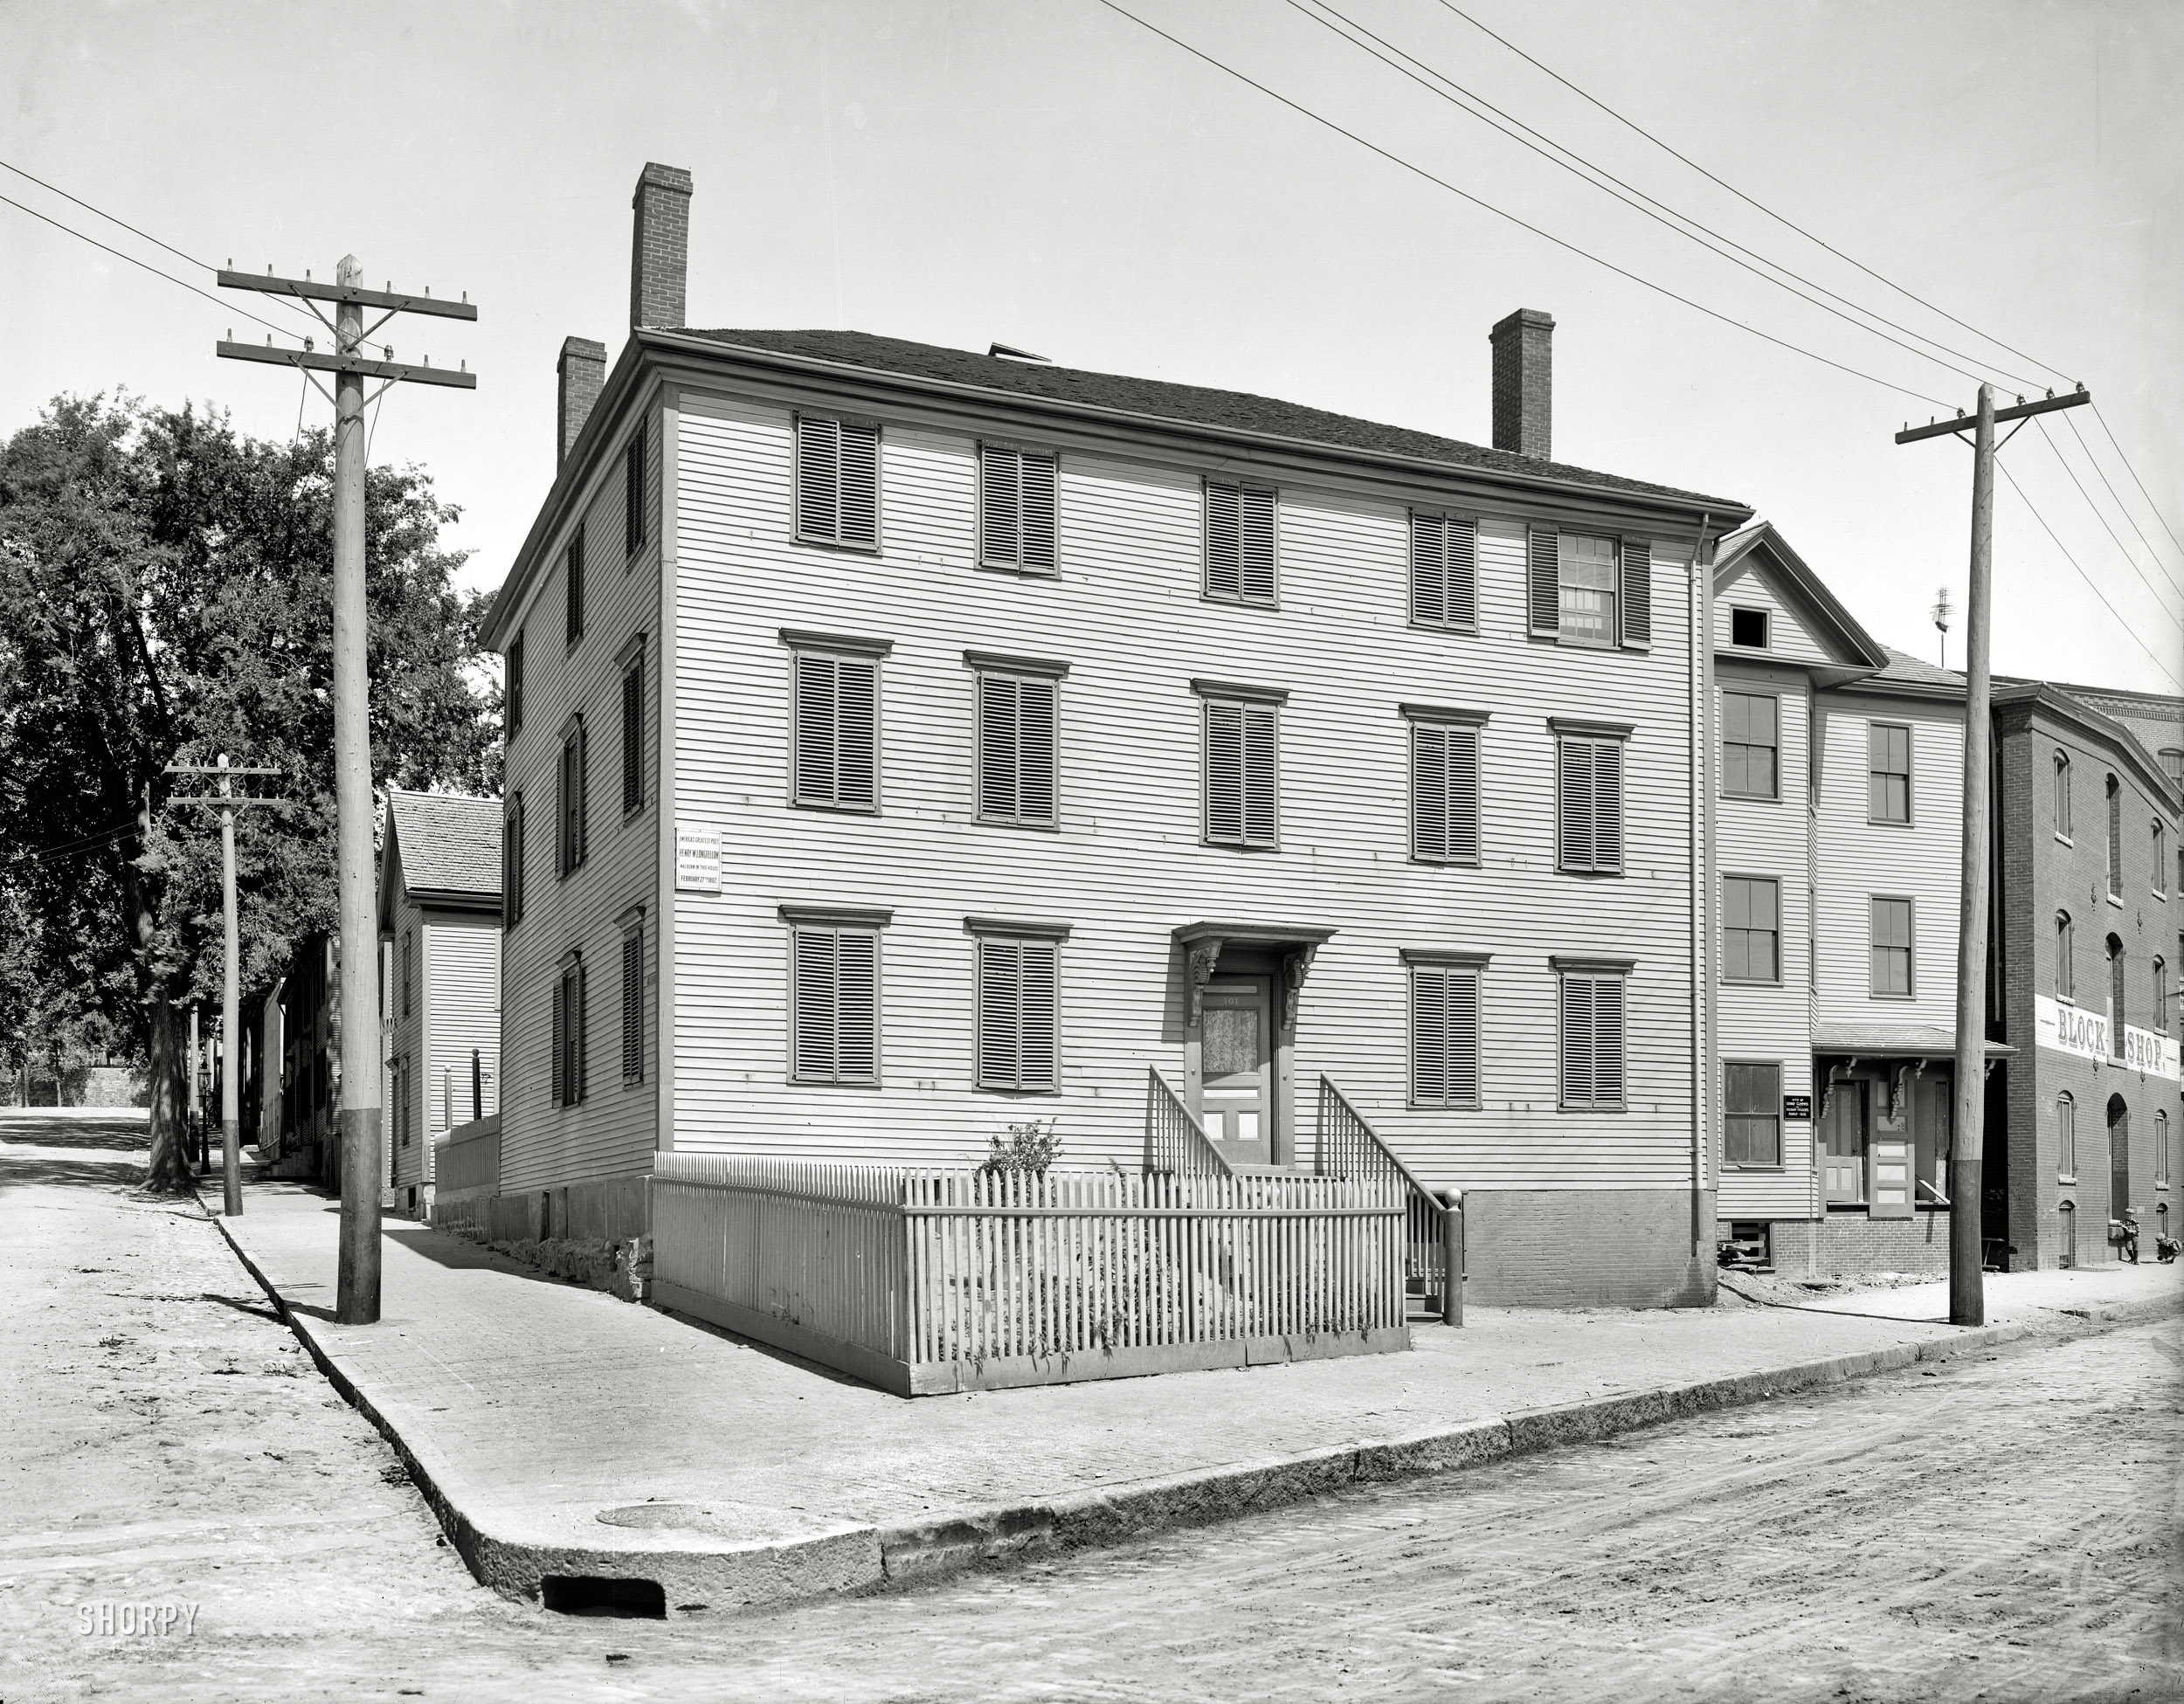 Portland, Maine, circa 1900. "Longfellow's birthplace." The home where Henry Wadsworth Longfellow was born in 1807, when Portland was part of Massachusetts. Off to the right, in front of the Block Shop: Two Shortfellows. 8x10 inch glass negative, Detroit Publishing Company. View full size.